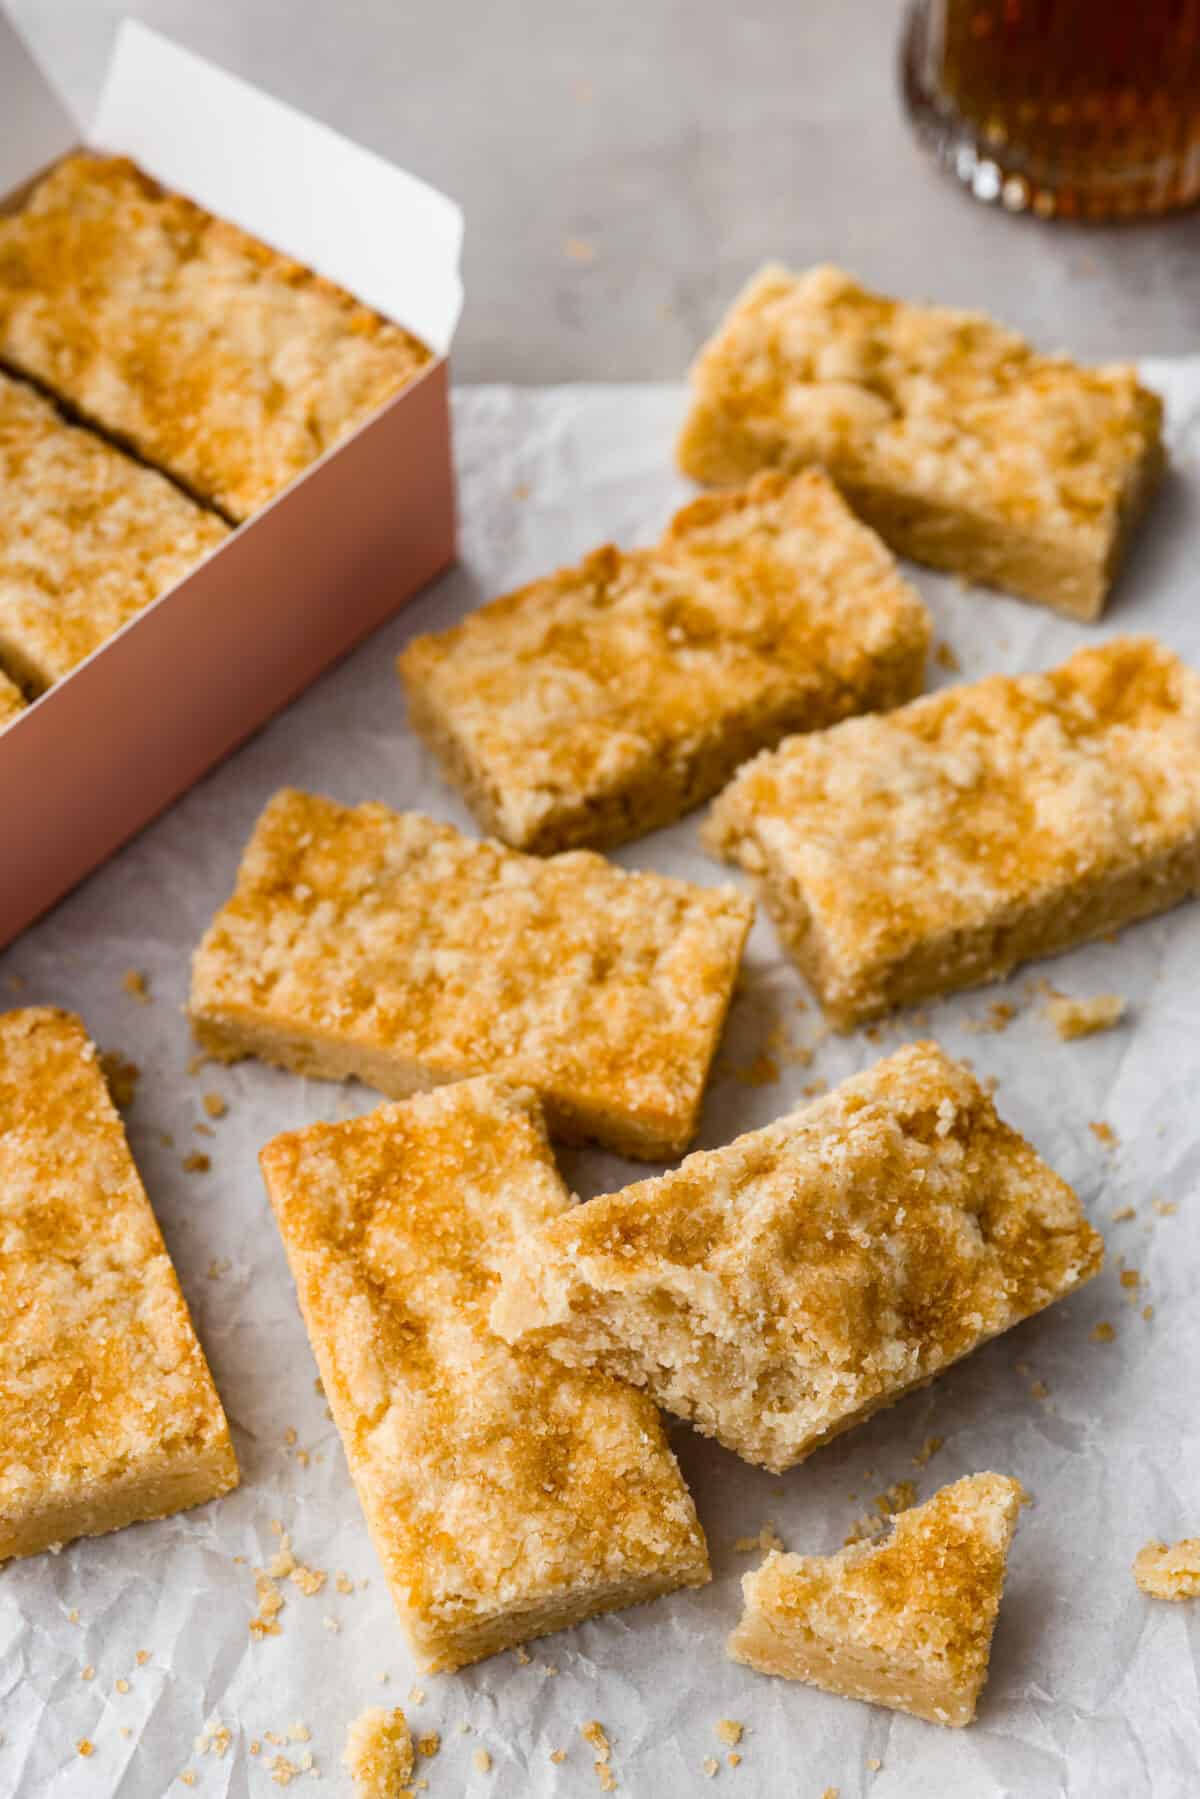 Biscuits (cookies) cut into rectangles on parchment paper with a pink box next to them filled with the cookies. 